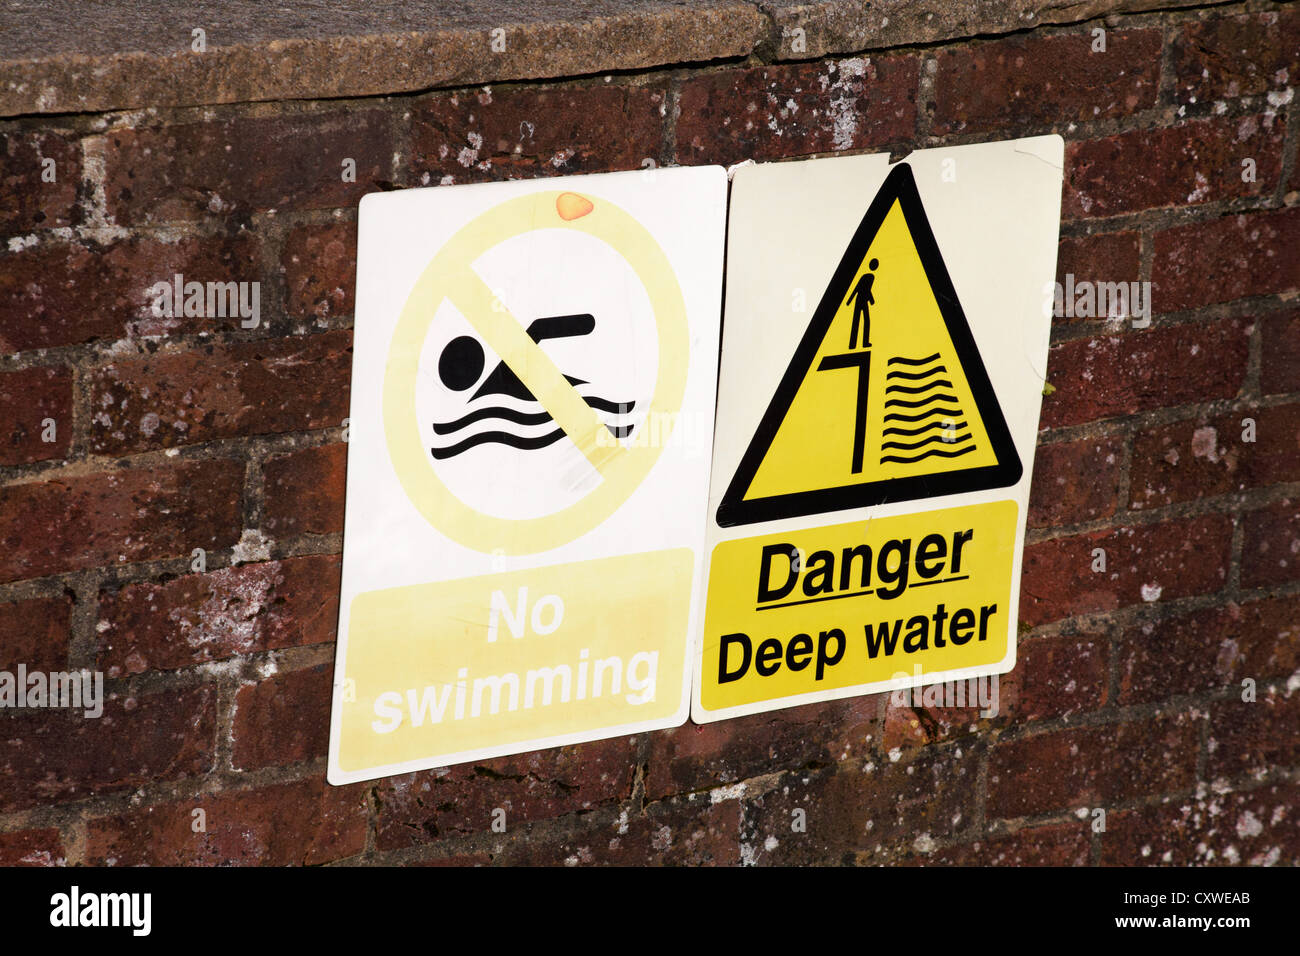 No swimming and danger deep water signs in Hampshire UK Stock Photo